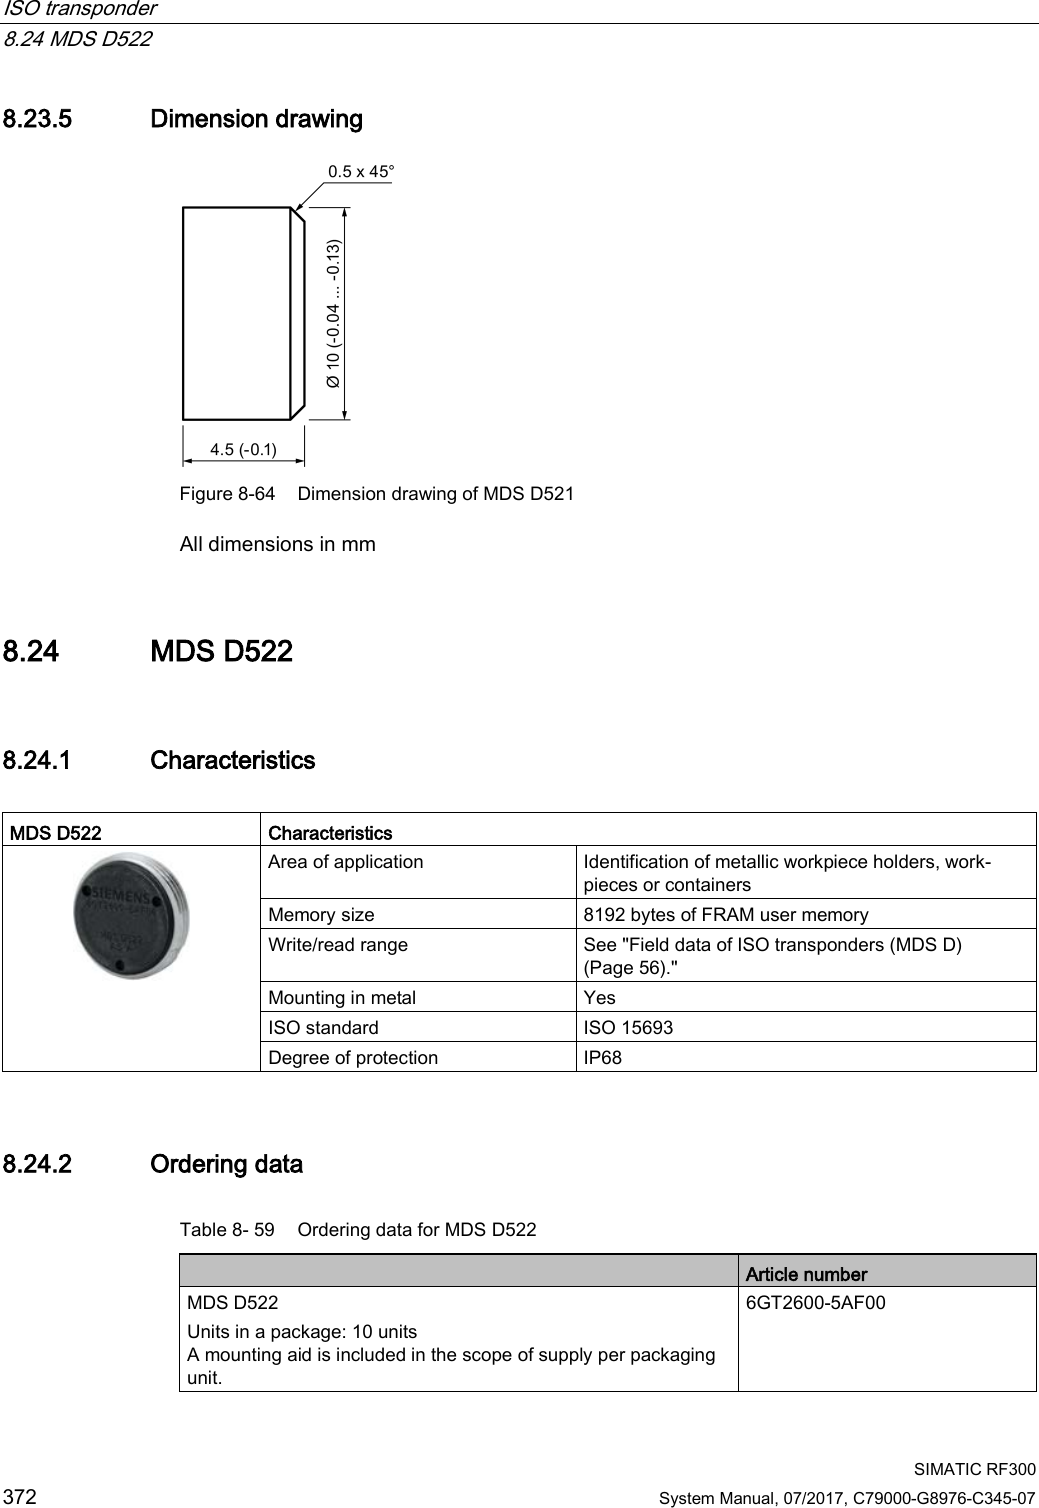 ISO transponder   8.24 MDS D522  SIMATIC RF300 372 System Manual, 07/2017, C79000-G8976-C345-07 8.23.5 Dimension drawing  Figure 8-64 Dimension drawing of MDS D521 All dimensions in mm 8.24 MDS D522 8.24.1 Characteristics  MDS D522  Characteristics  Area of application Identification of metallic workpiece holders, work-pieces or containers Memory size 8192 bytes of FRAM user memory Write/read range See &quot;Field data of ISO transponders (MDS D) (Page 56).&quot; Mounting in metal Yes ISO standard ISO 15693 Degree of protection IP68 8.24.2 Ordering data Table 8- 59 Ordering data for MDS D522  Article number MDS D522 Units in a package: 10 units A mounting aid is included in the scope of supply per packaging unit. 6GT2600-5AF00 